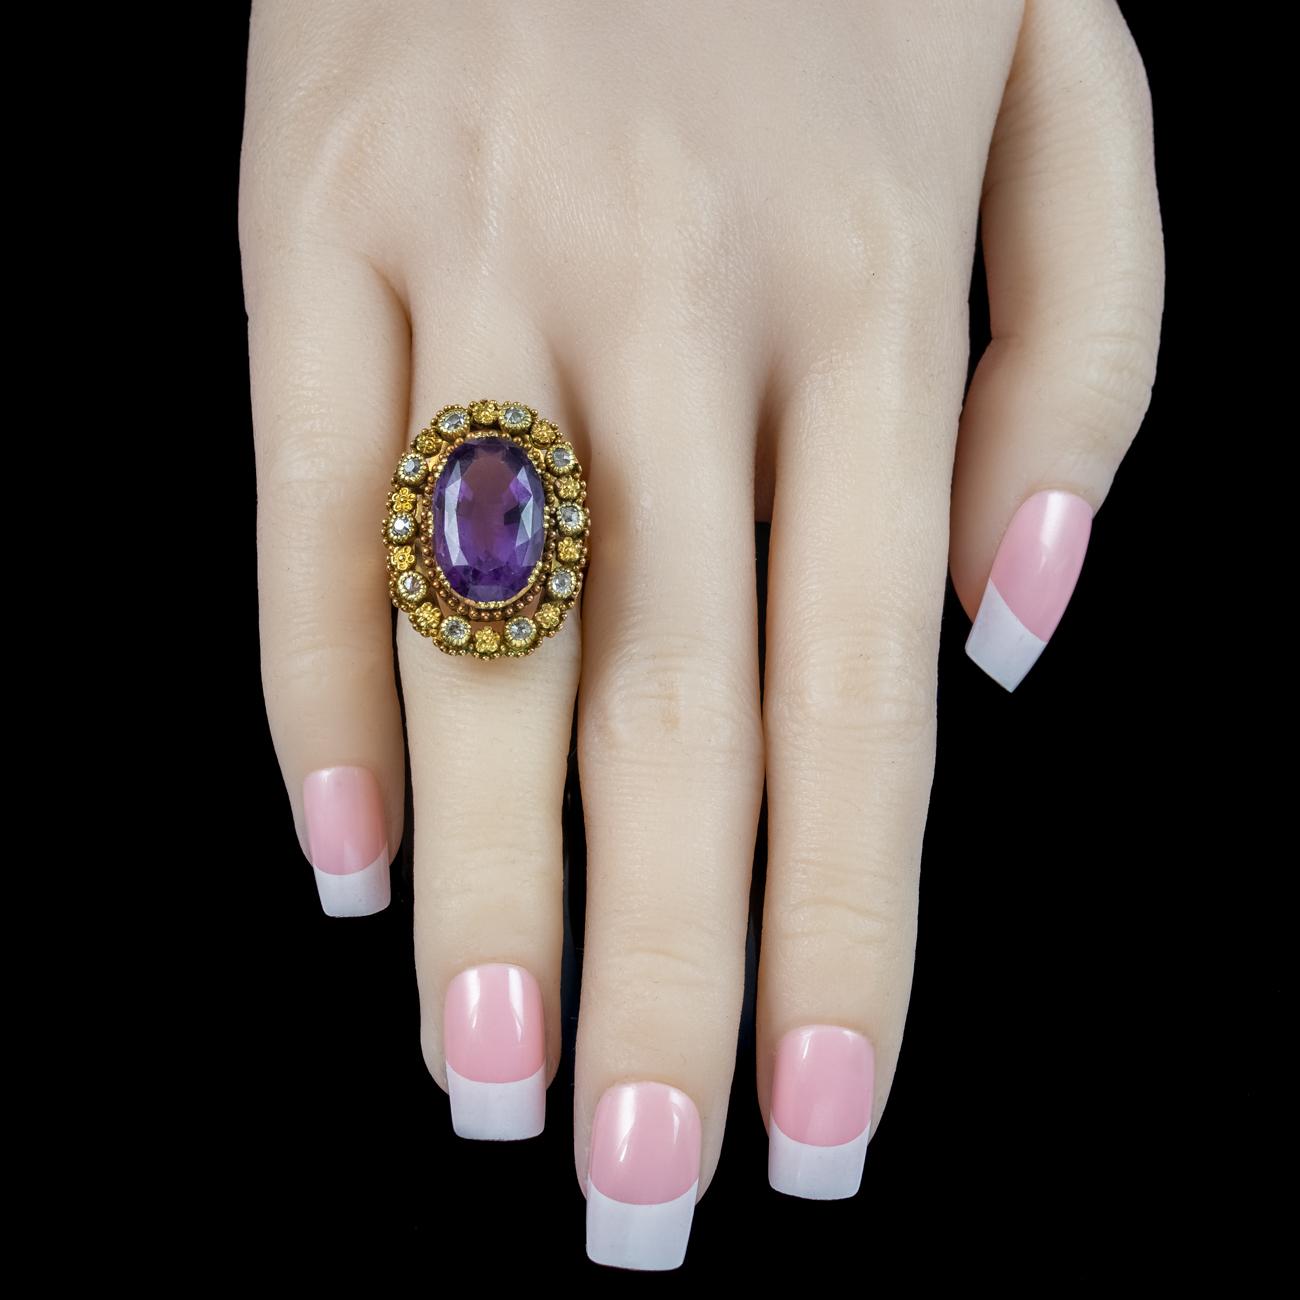 Antique Victorian Amethyst Diamond Ring 7.2ct Amethyst For Sale 2